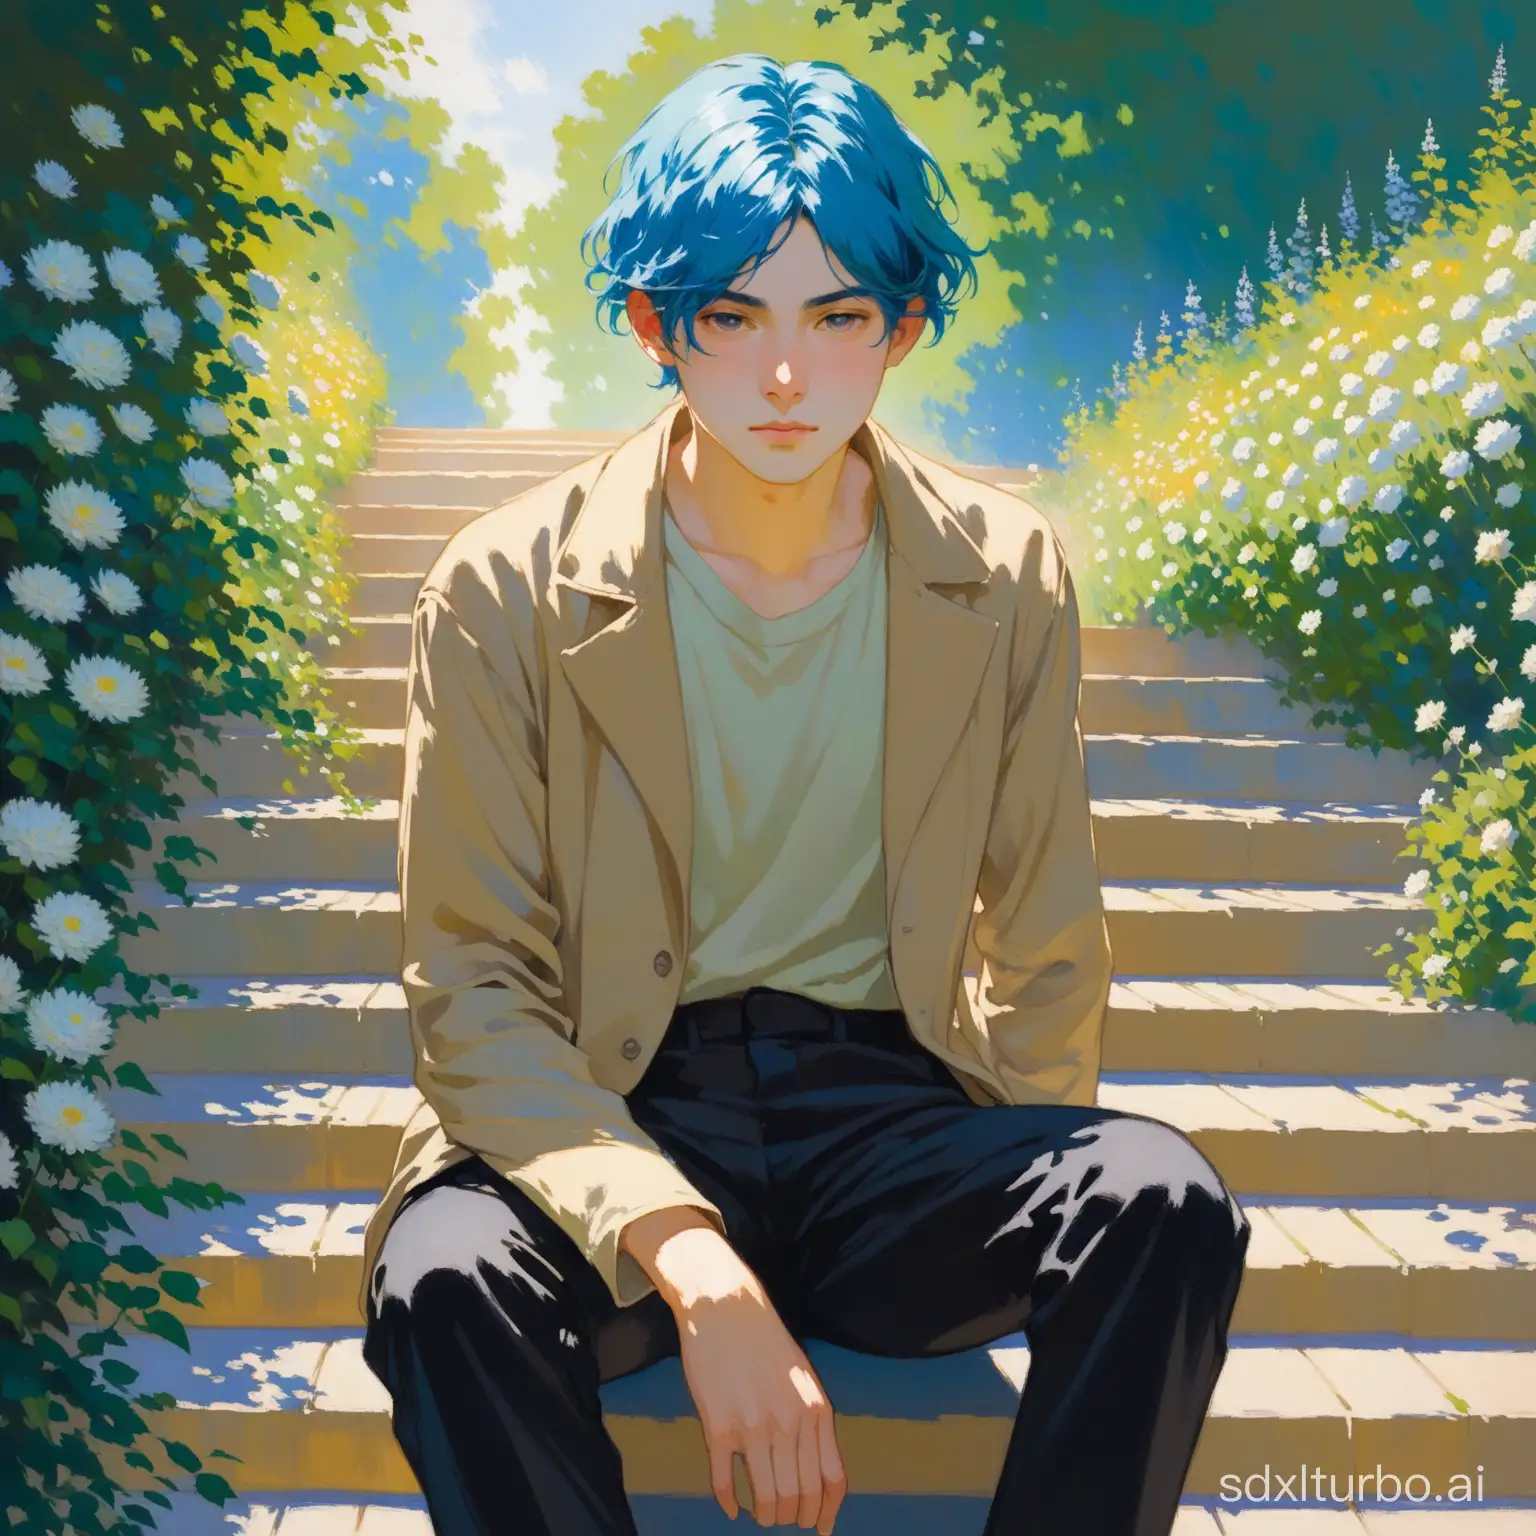 Young adult (early 20s) in beige shirt and black pants wearing a Halston Frowick coat, long blue hair, with disoriented expression on his face, sitting on some stairs surrounded by flowers (good anatomy). Colorful gouache on paper. Impressionism. By Claude Monet.https://historia-arte.com/artistas/claude-monet. Slight blur, skin glow, cool blue and green colored background. Cool natural light from upper right creates dark shadow. Choppy shot, cowboy shot. Beautiful, serene, peaceful.